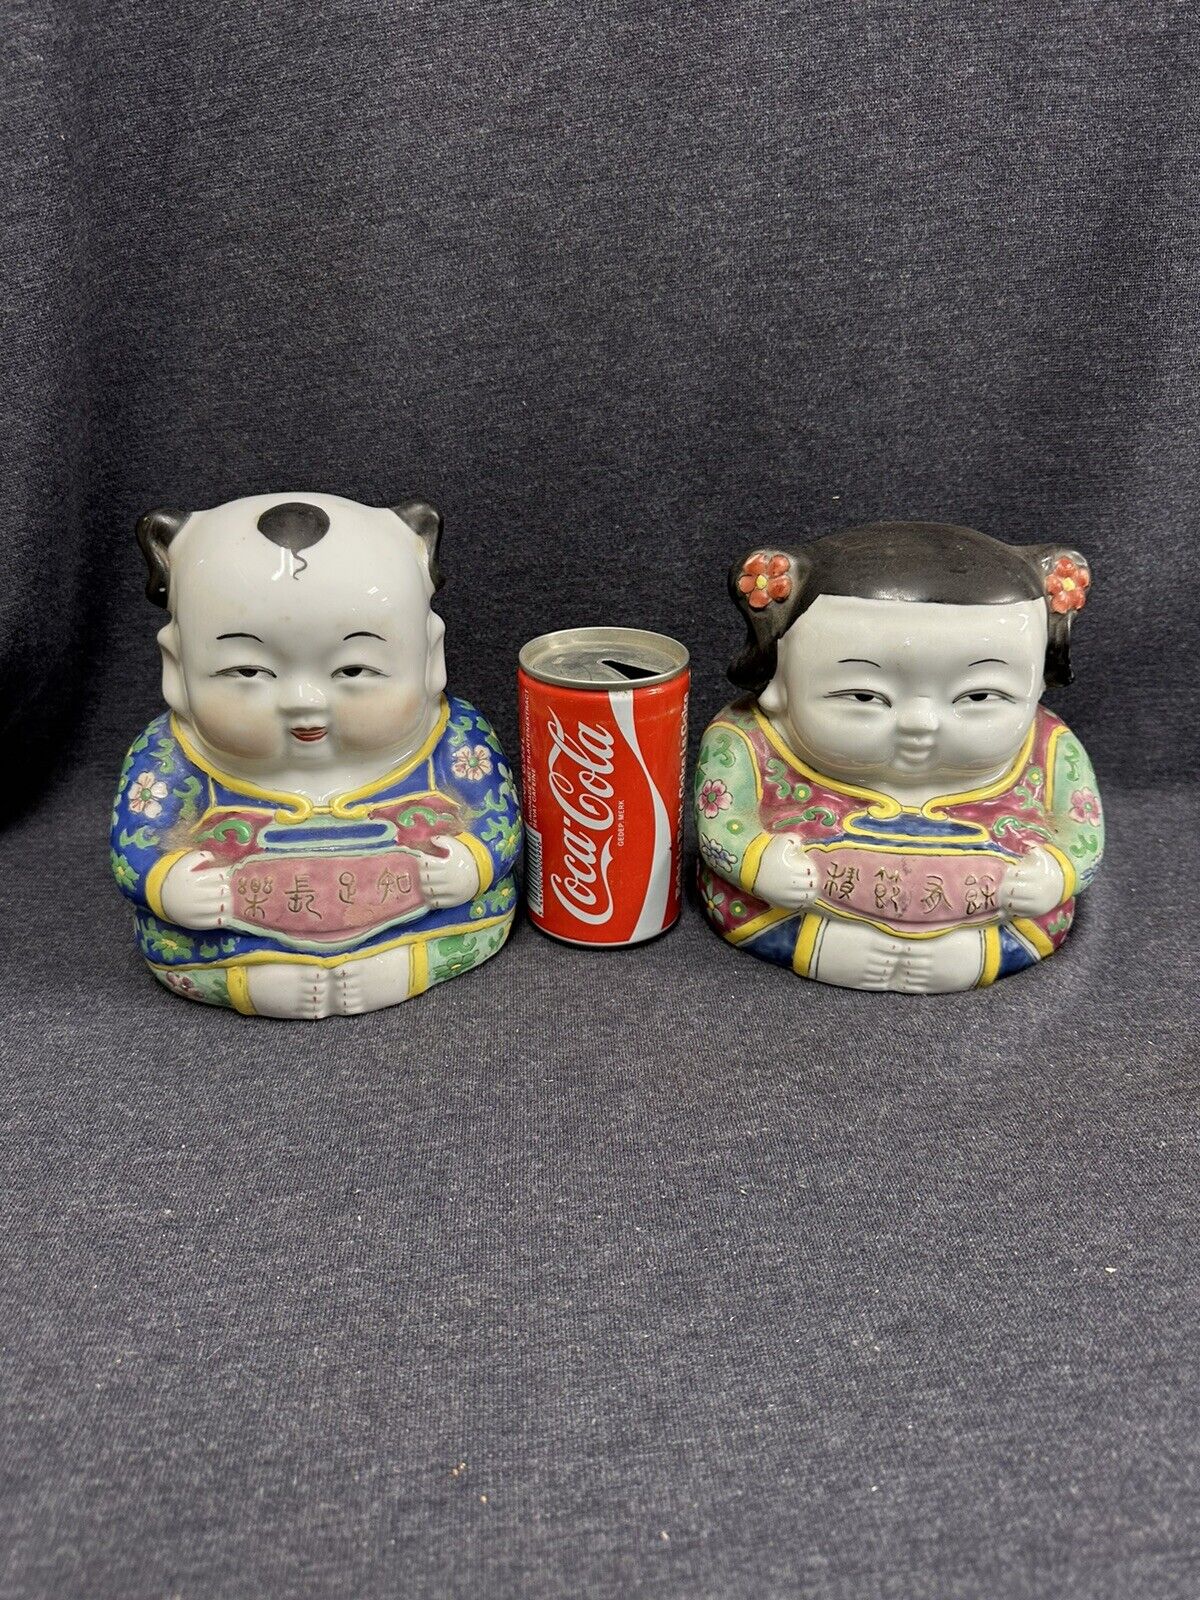 Rare Vintage Bloomingdale’s Buddha Babies Ceramic Figures Boy and Girl Excellent